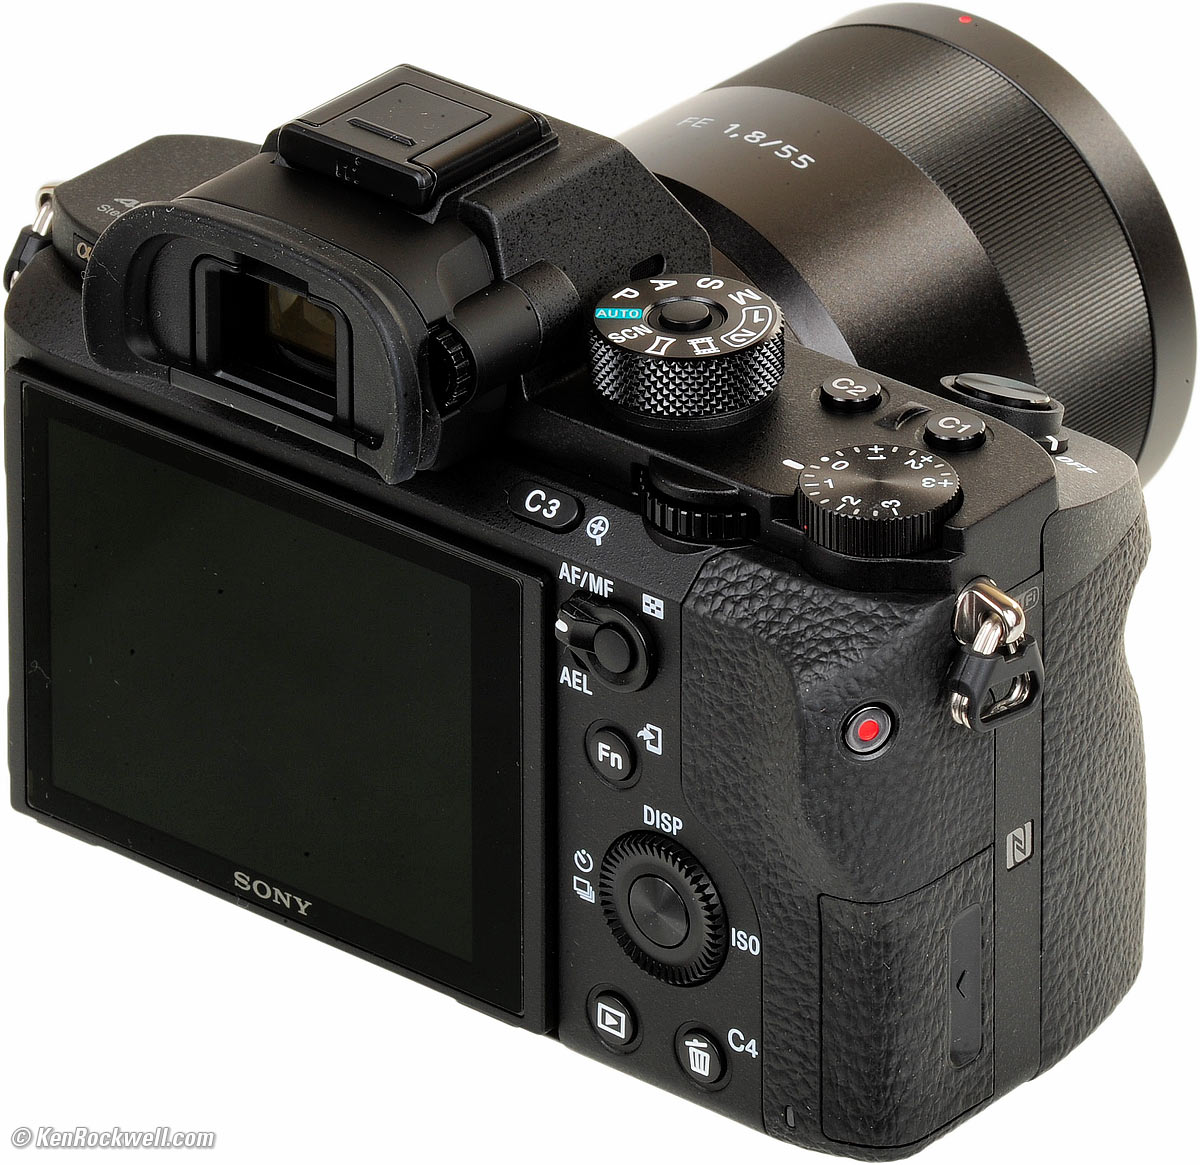 Sony A7R II Review